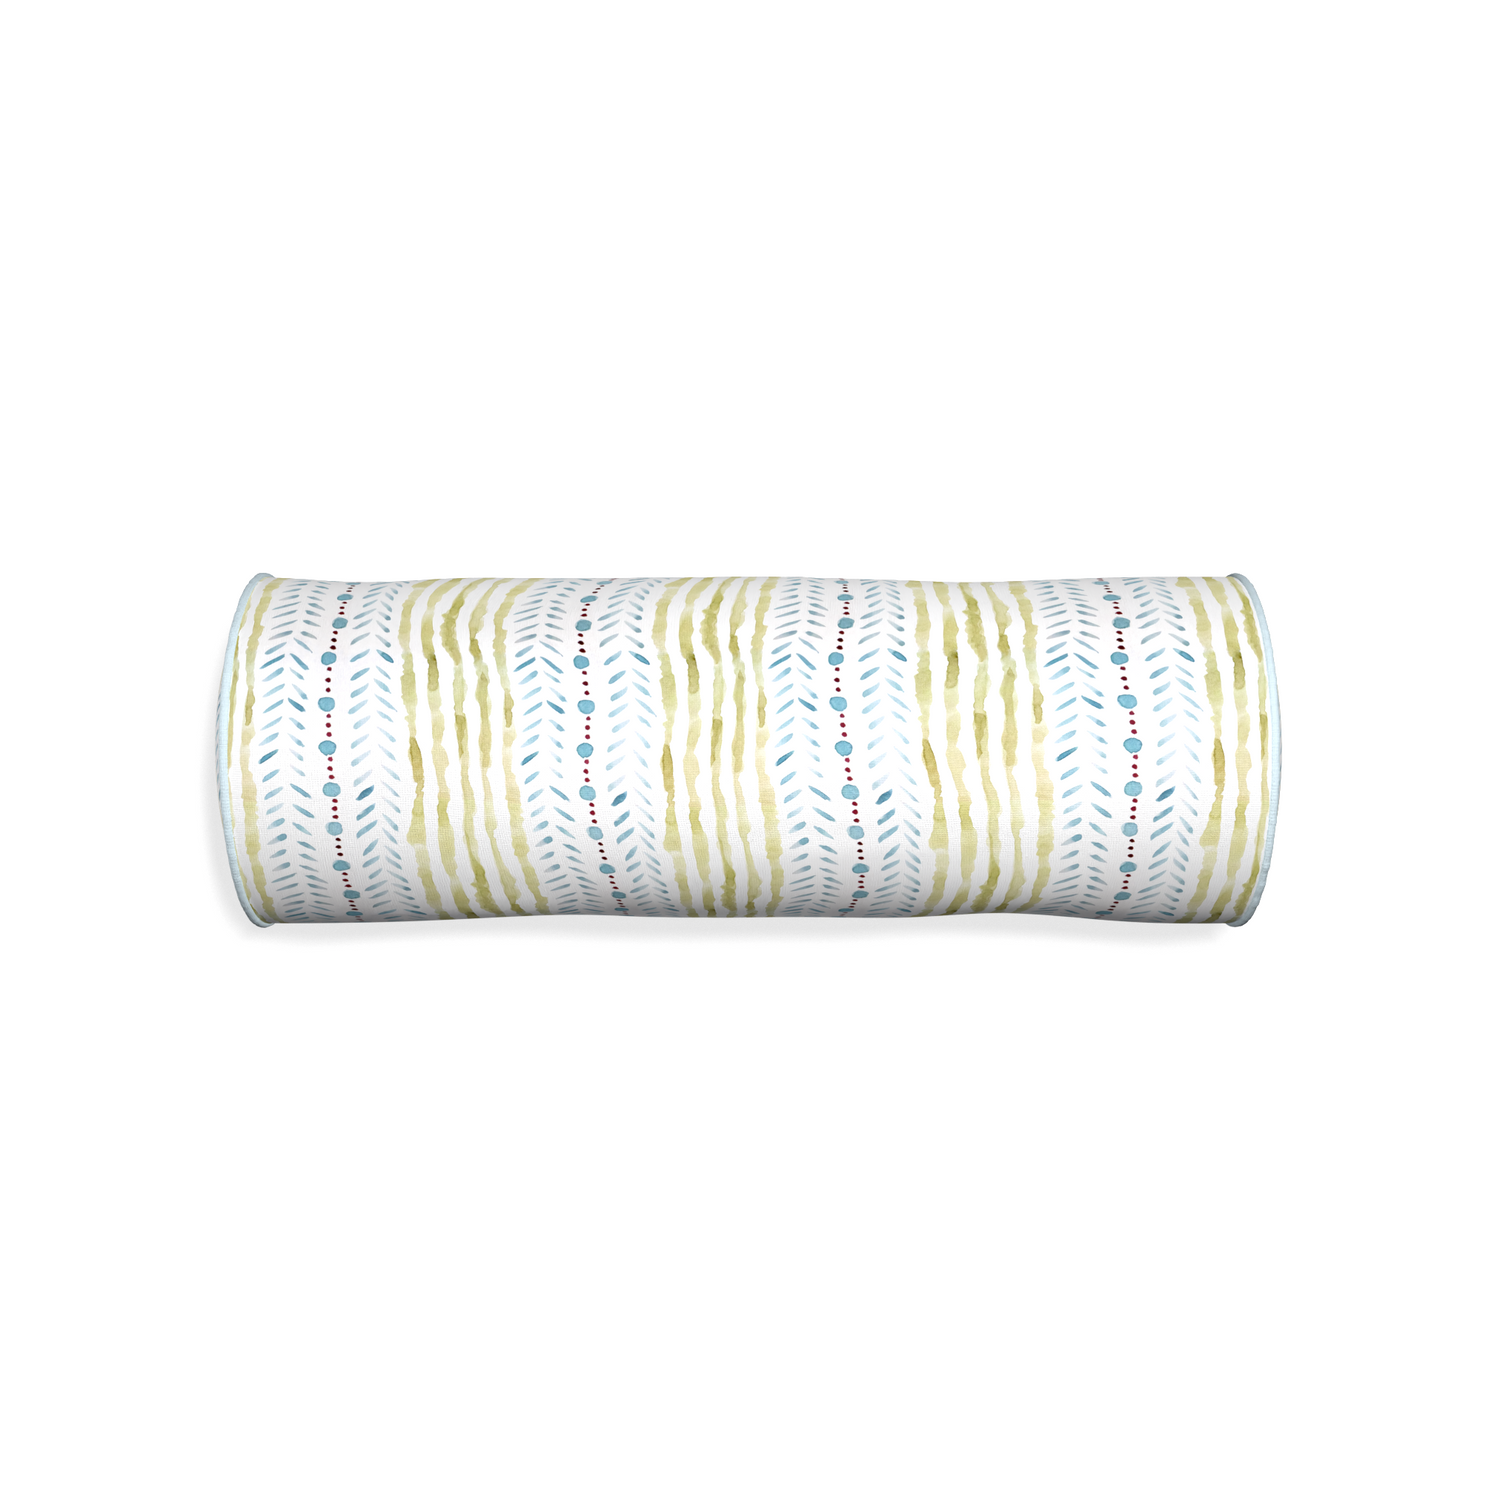 Bolster julia custom blue & green stripedpillow with powder piping on white background